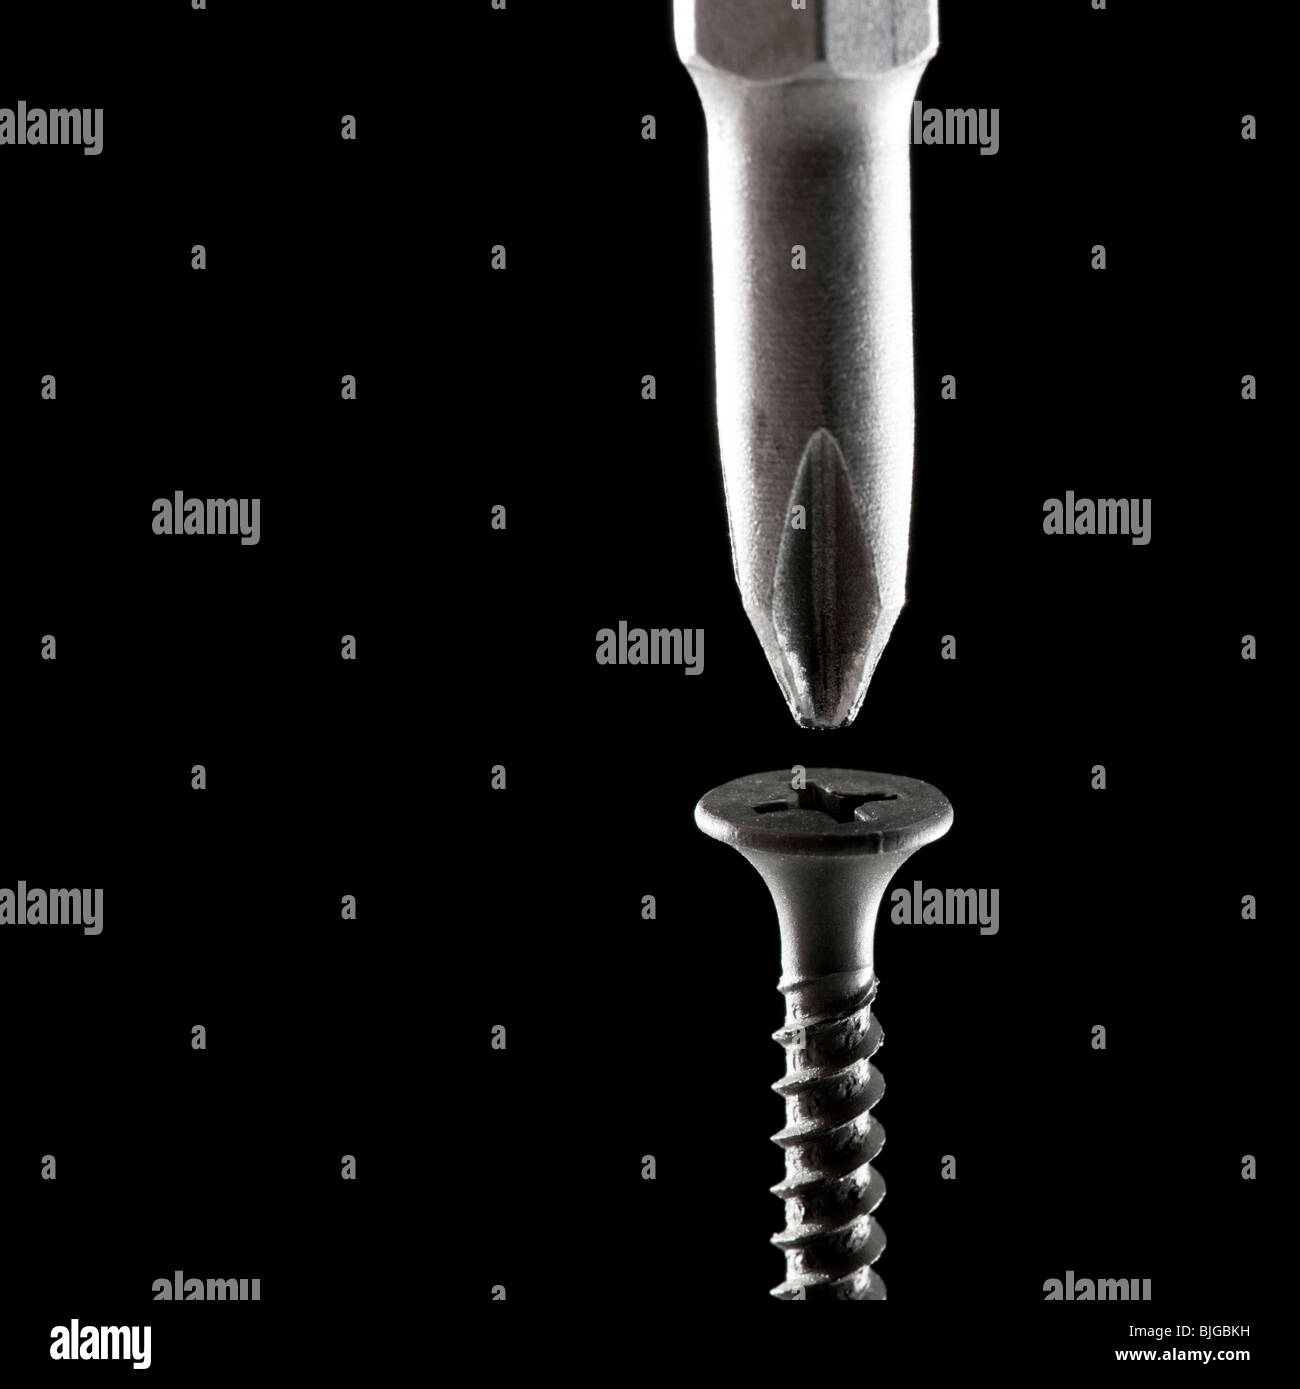 screwdriver about to screw in a wood screw Stock Photo